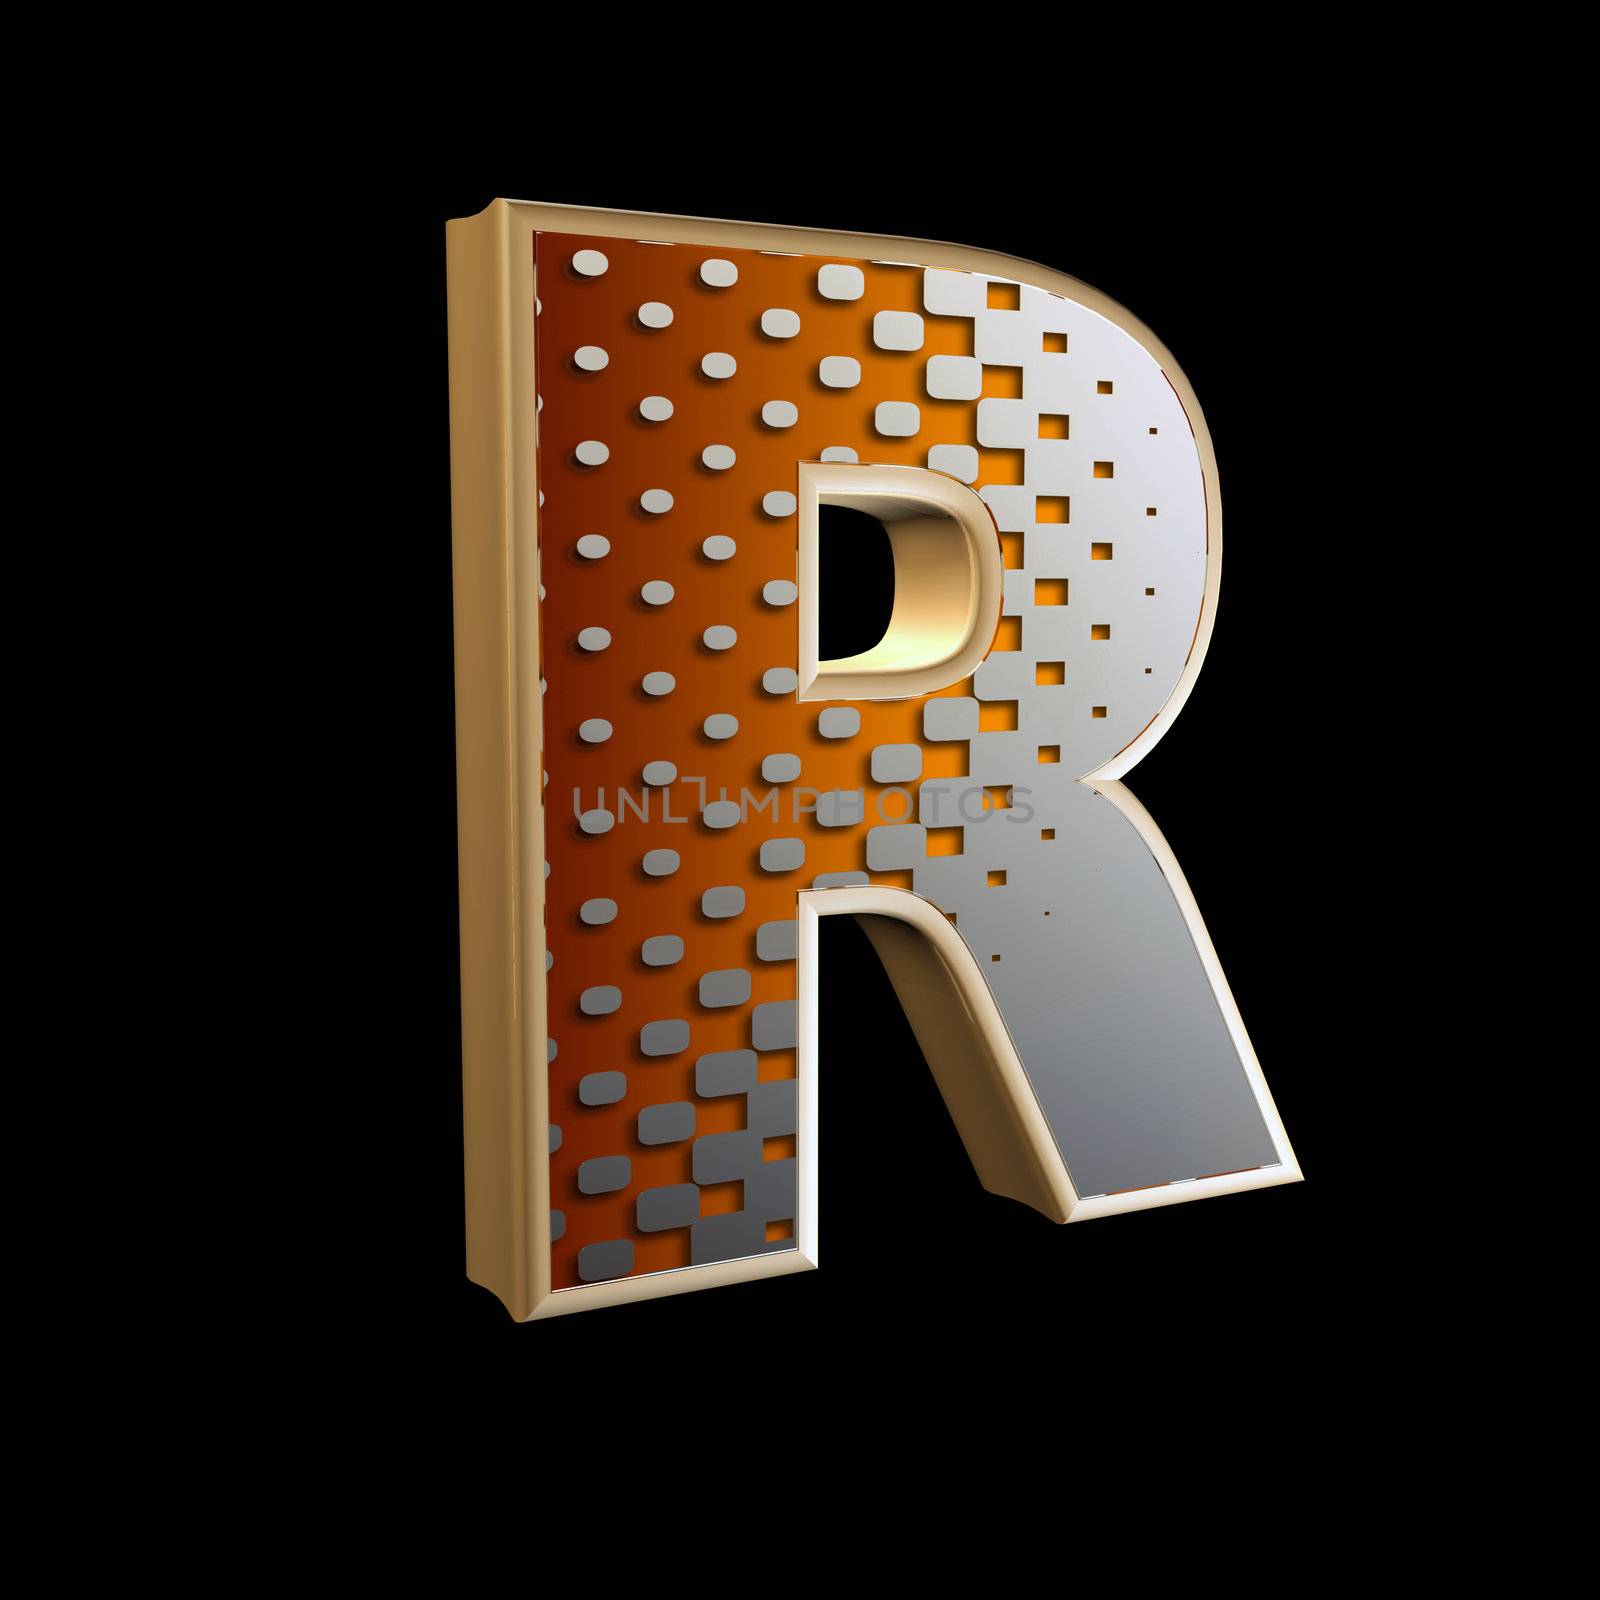 3d abstract letter with modern halftone pattern - R by chrisroll